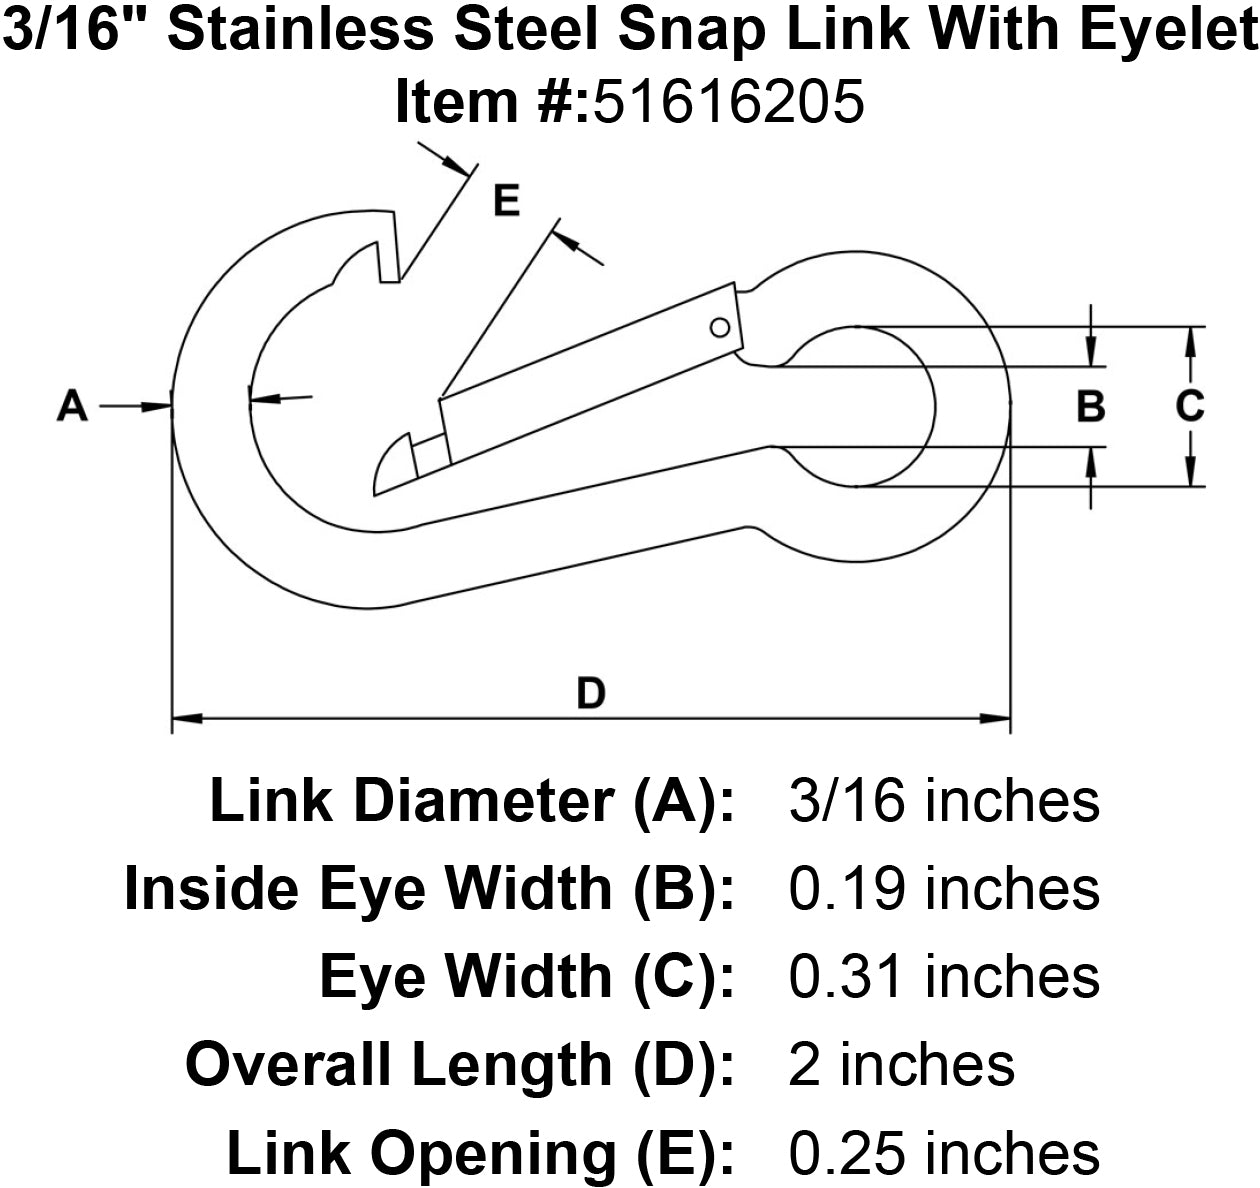 3/16" Stainless Steel Snap Link With Eyelet